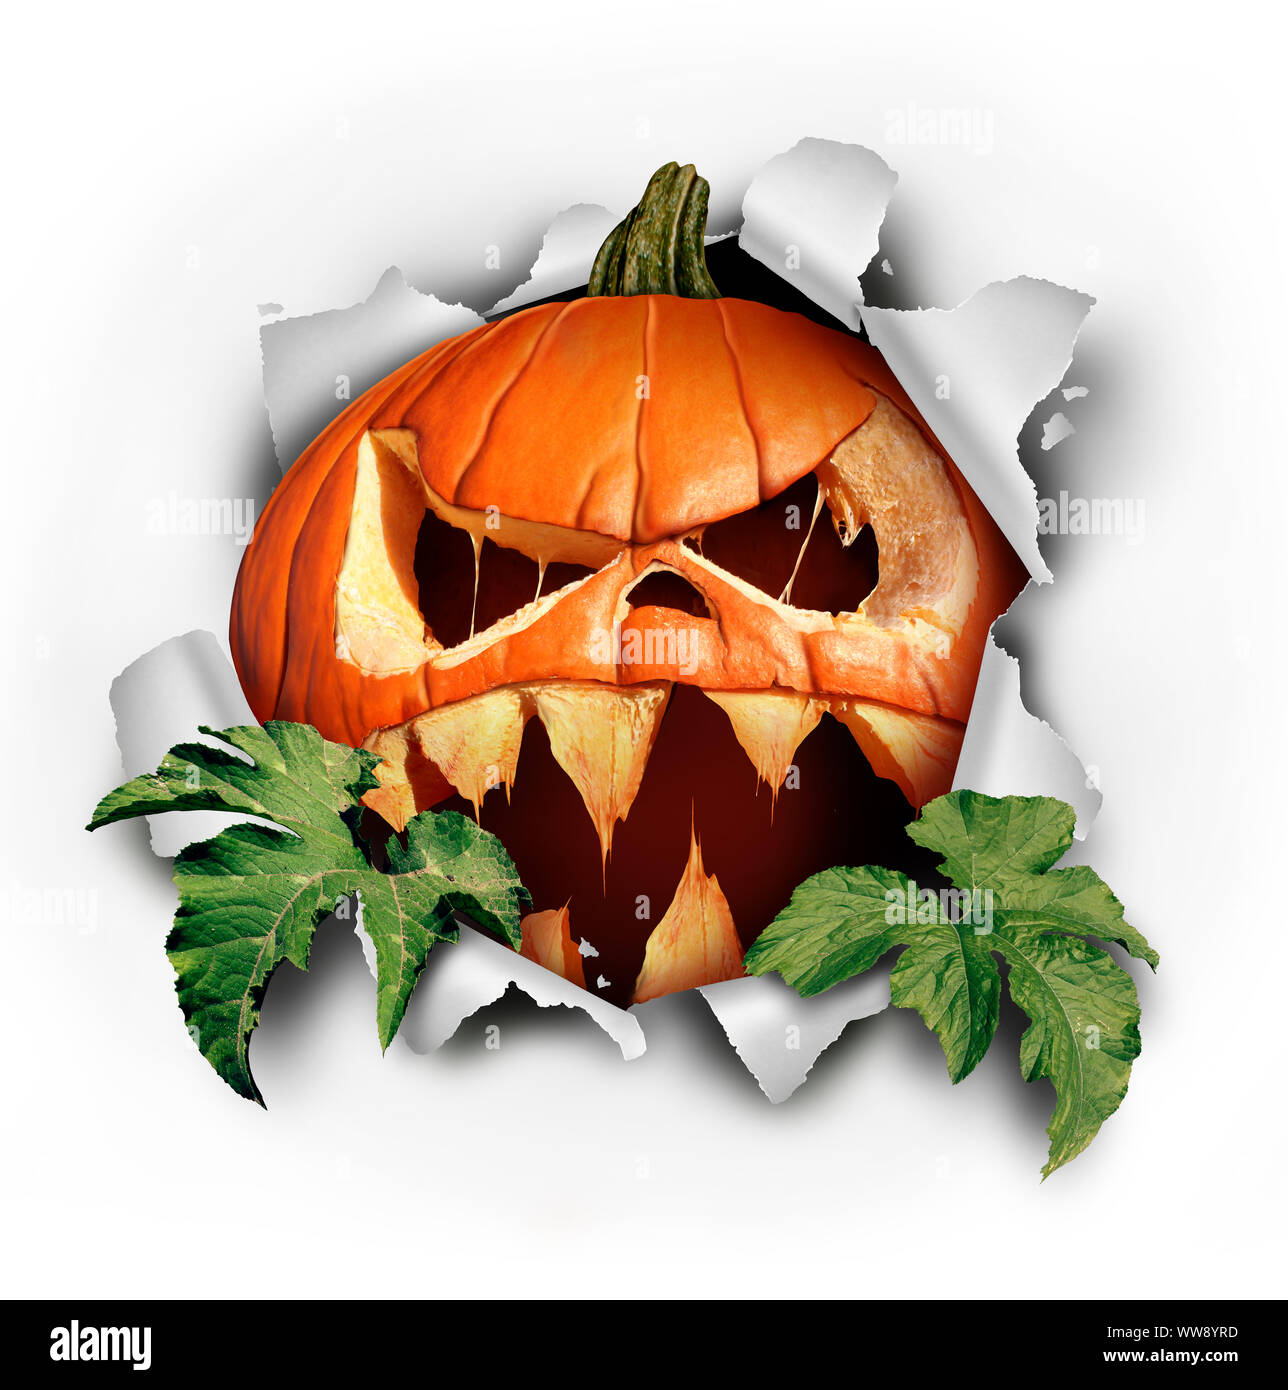 Pumpkin halloween surprise tearing paper with leaves bursting out of ripped hole as a scary dangerous evil jack o lantern with a threatening. Stock Photo